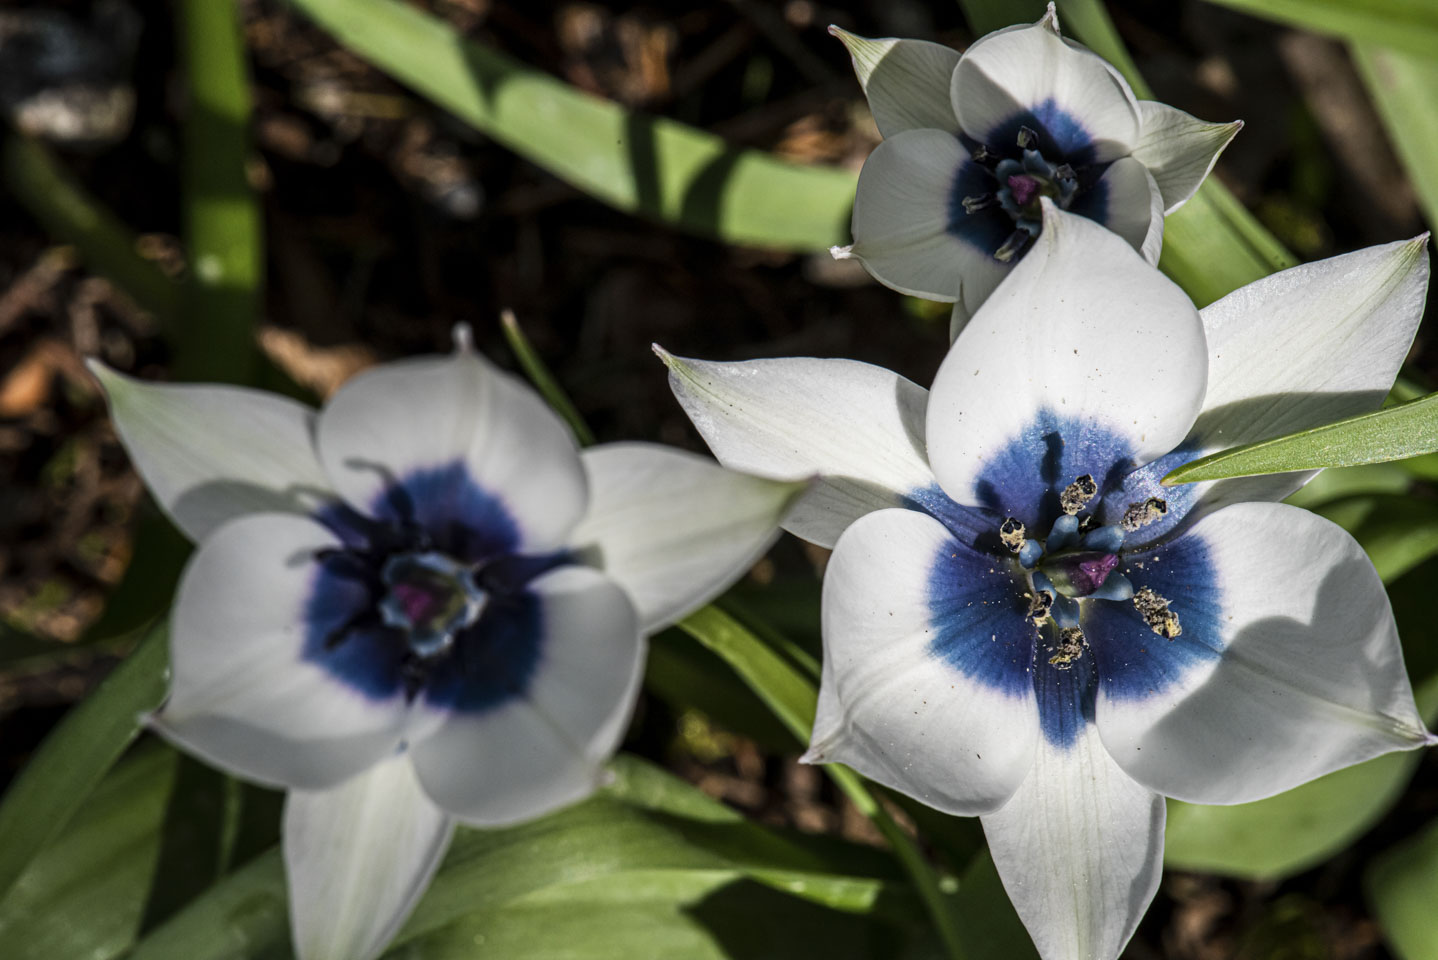 Cluster of white flowers with blue centers